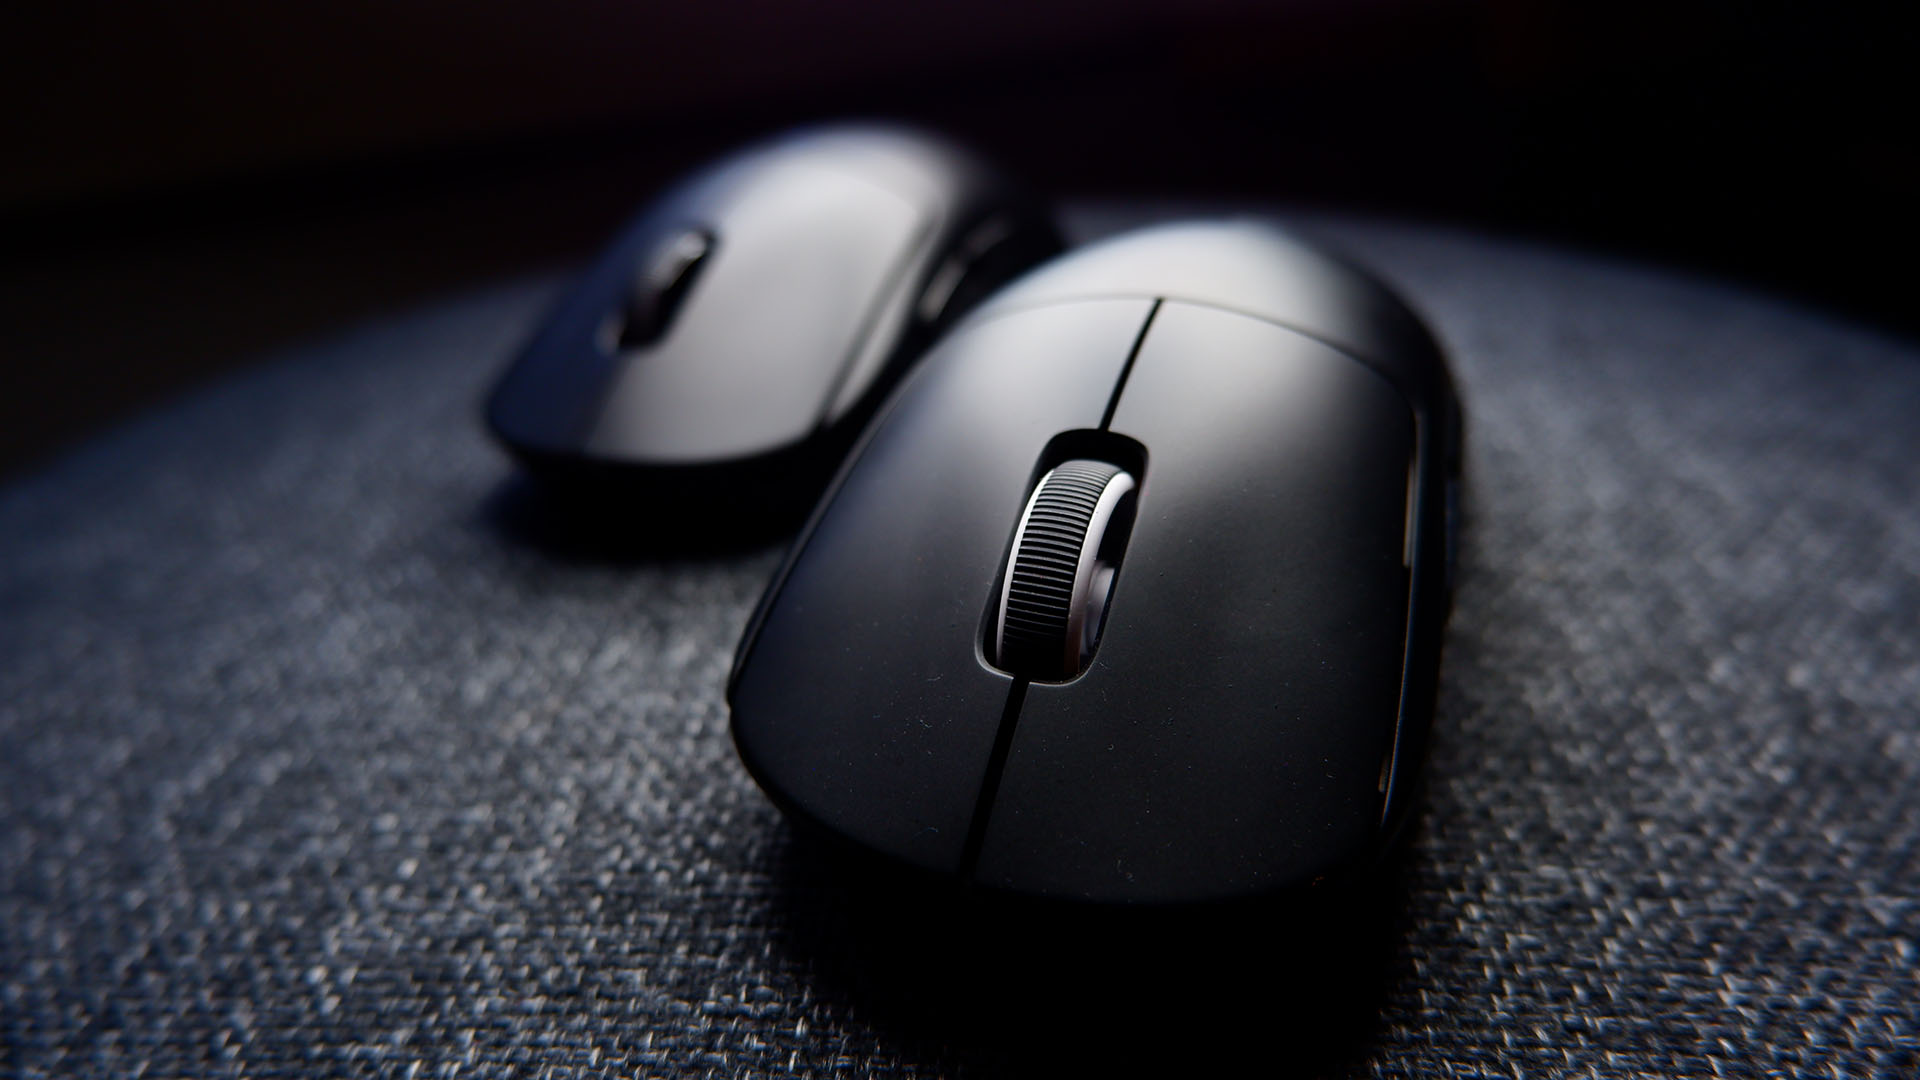 Logitech G Pro X Superlight gaming mouse pictured with dark background